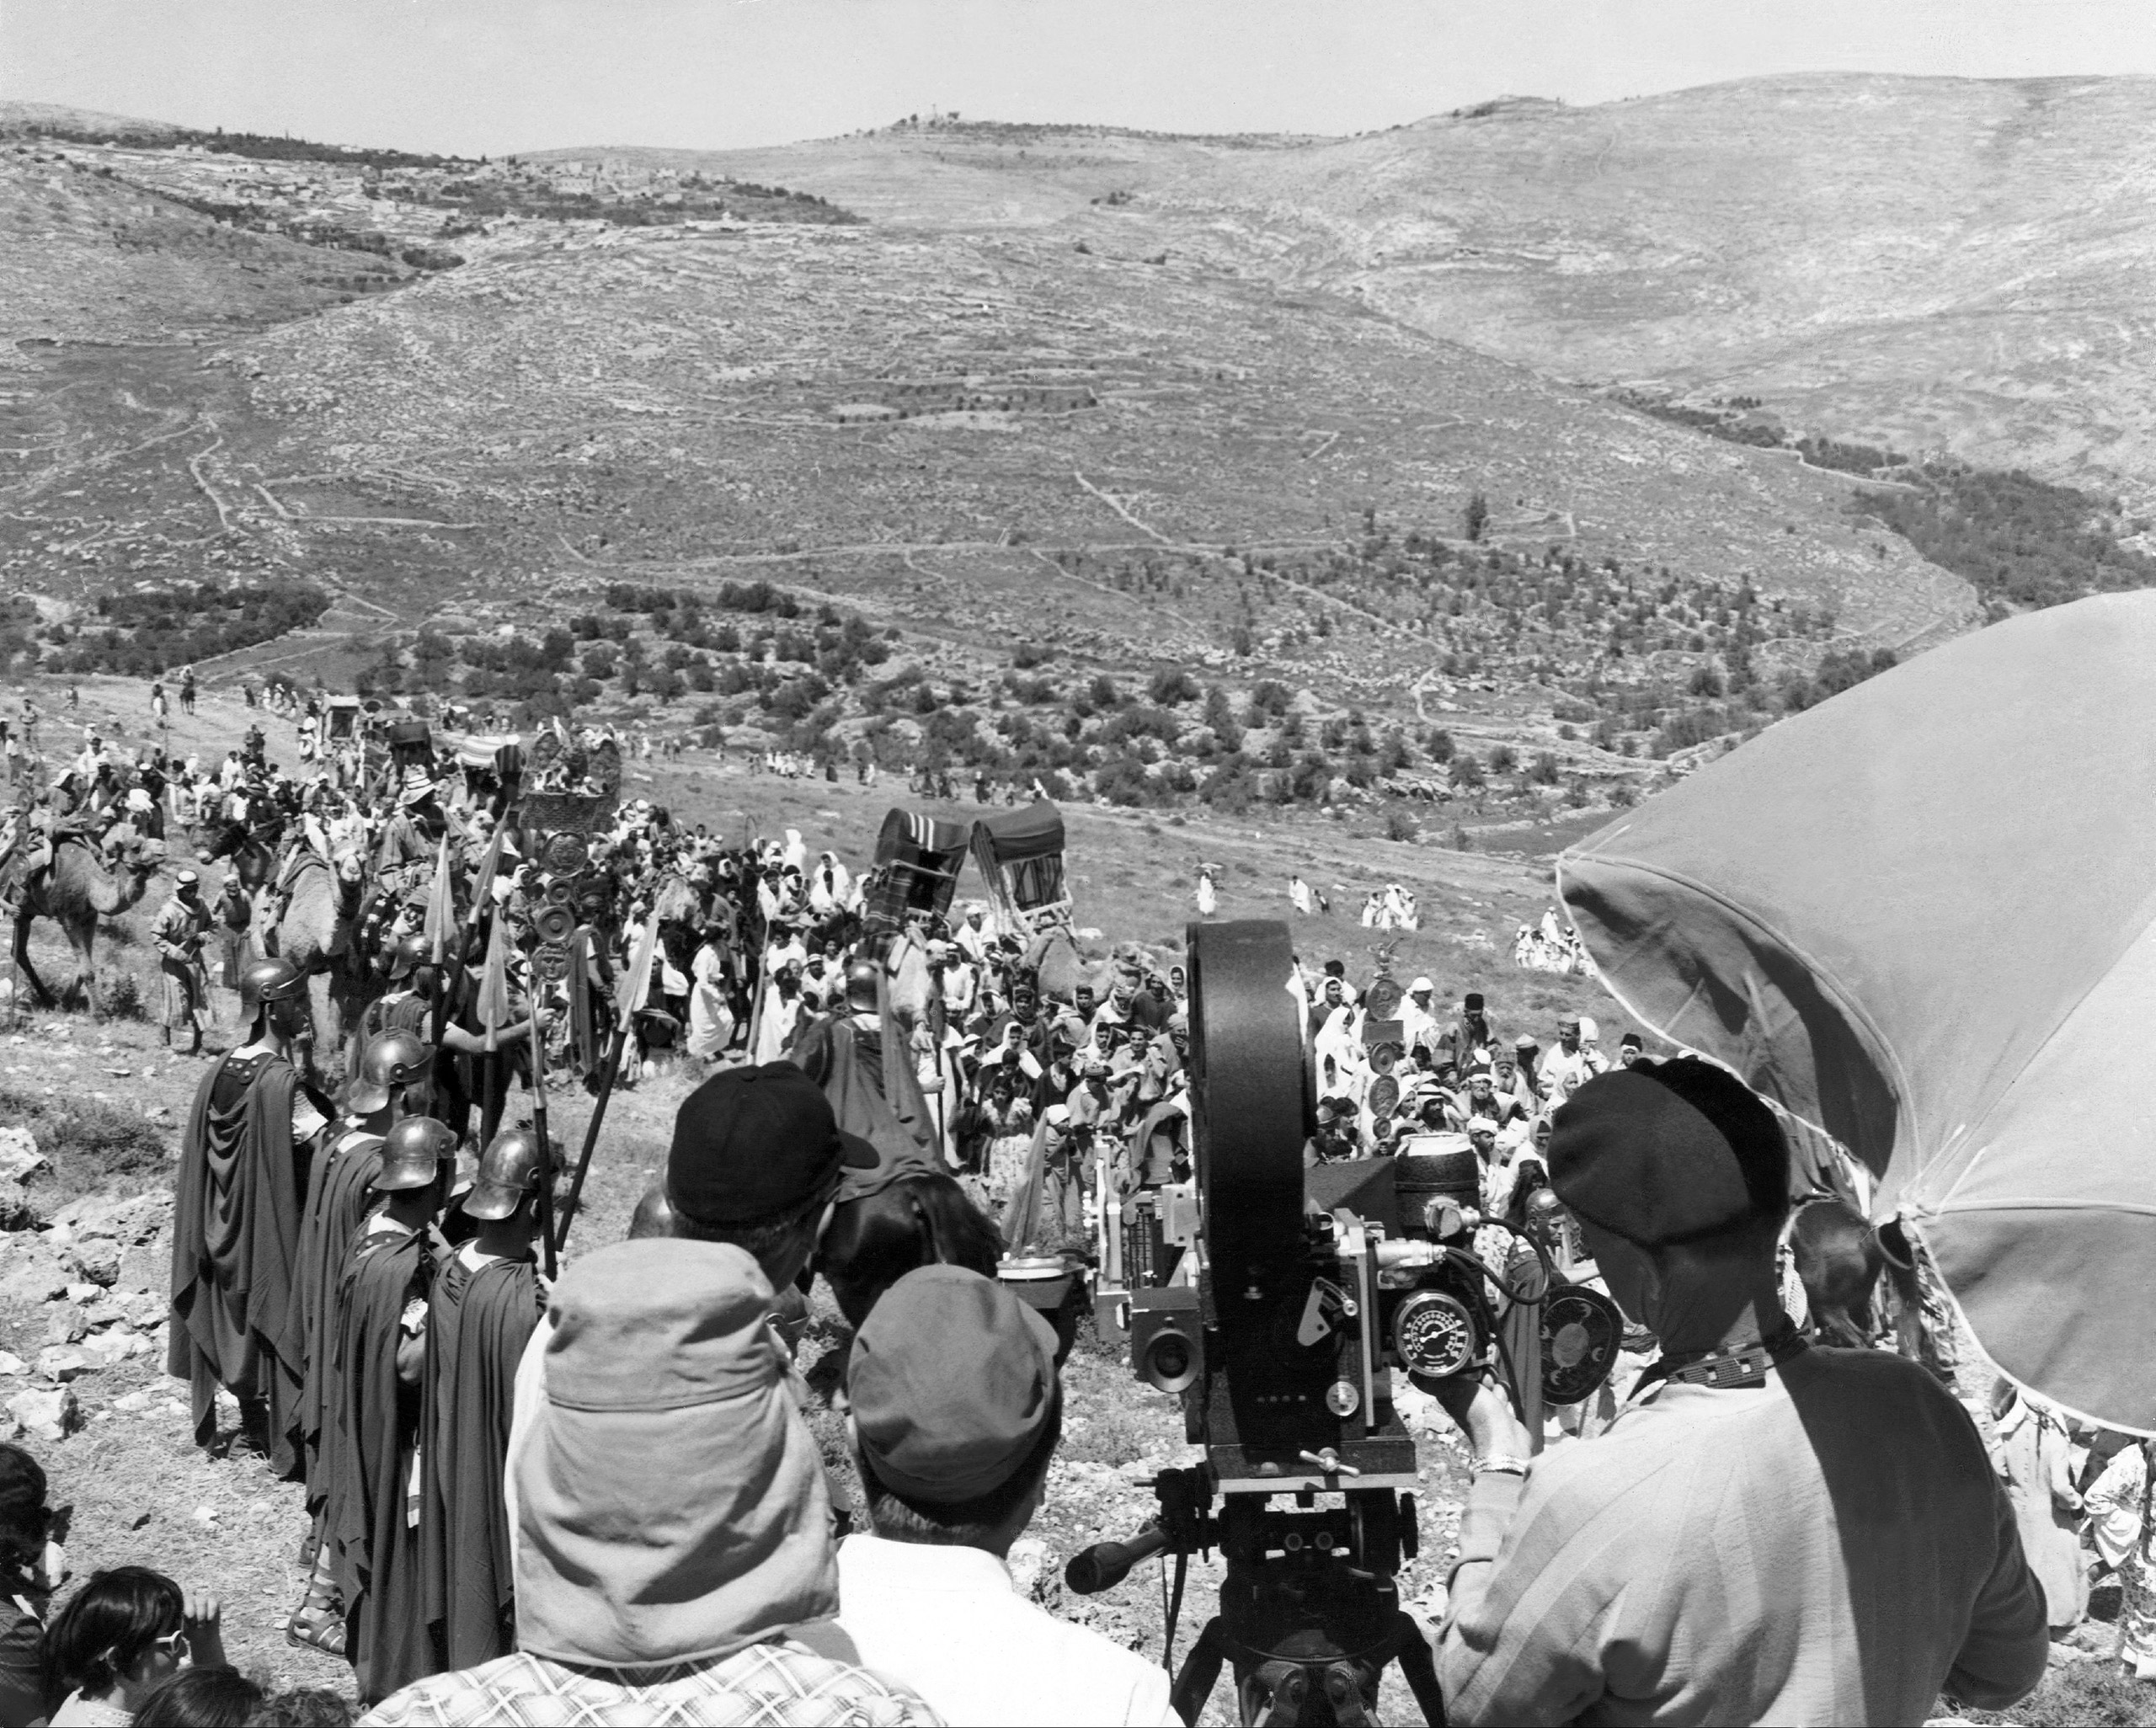 Extras and film technicians from the film Ben-Hur by William Wyler, are gathered on a hill near Jerusalem to film.